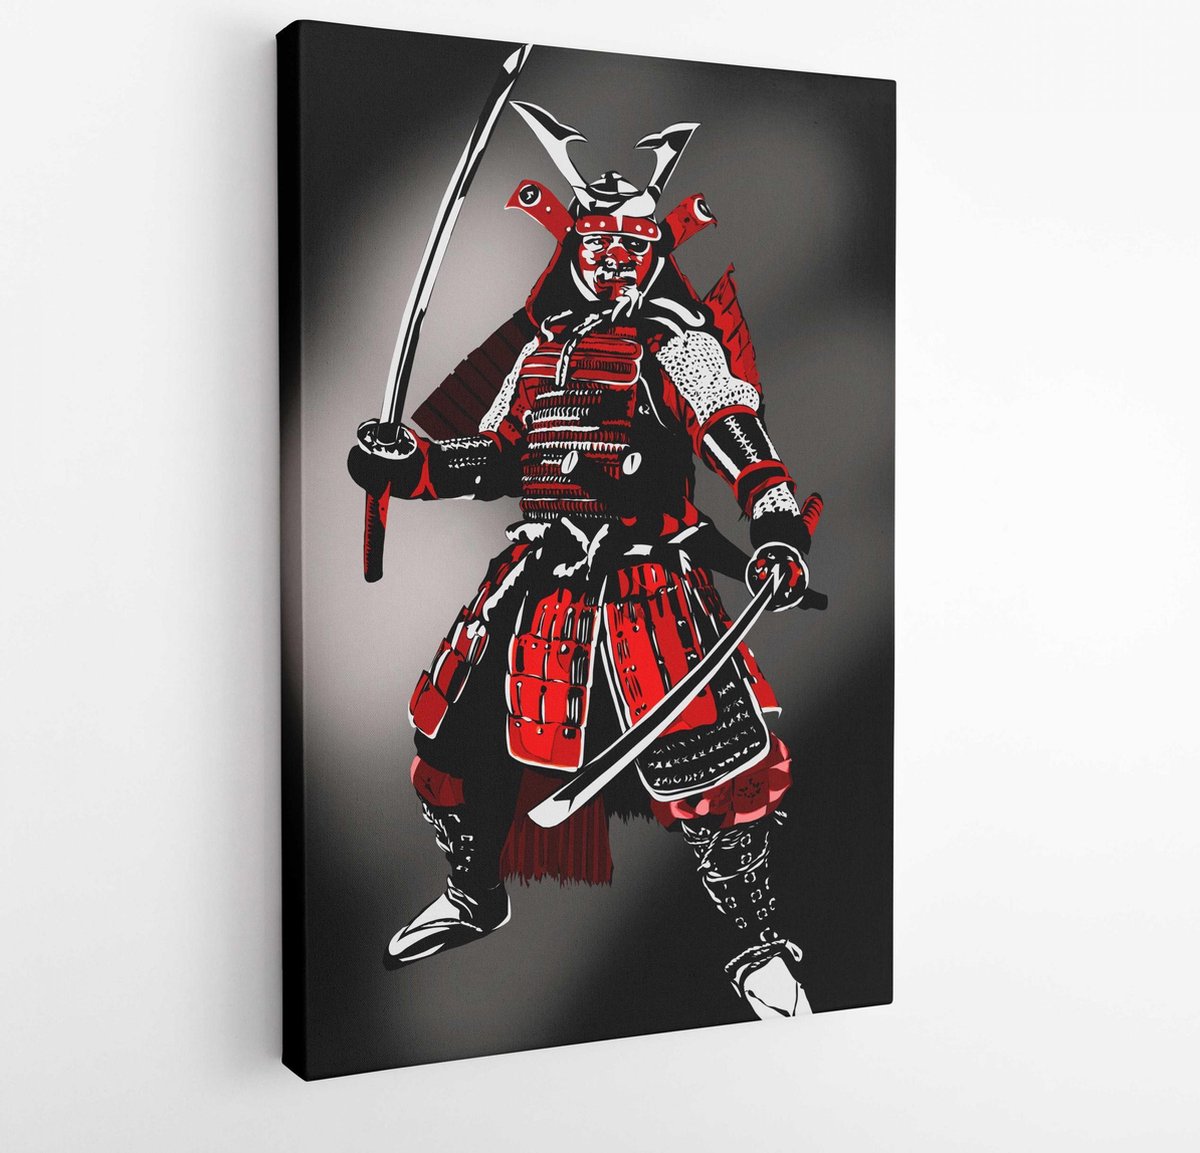 Samurai Member of the privileged feudal military caste of Japan Samurai with swords in traditional dress - Modern Art Canvas-Vertical - 1344581528 - 80*60 Vertical - onlinecanvas